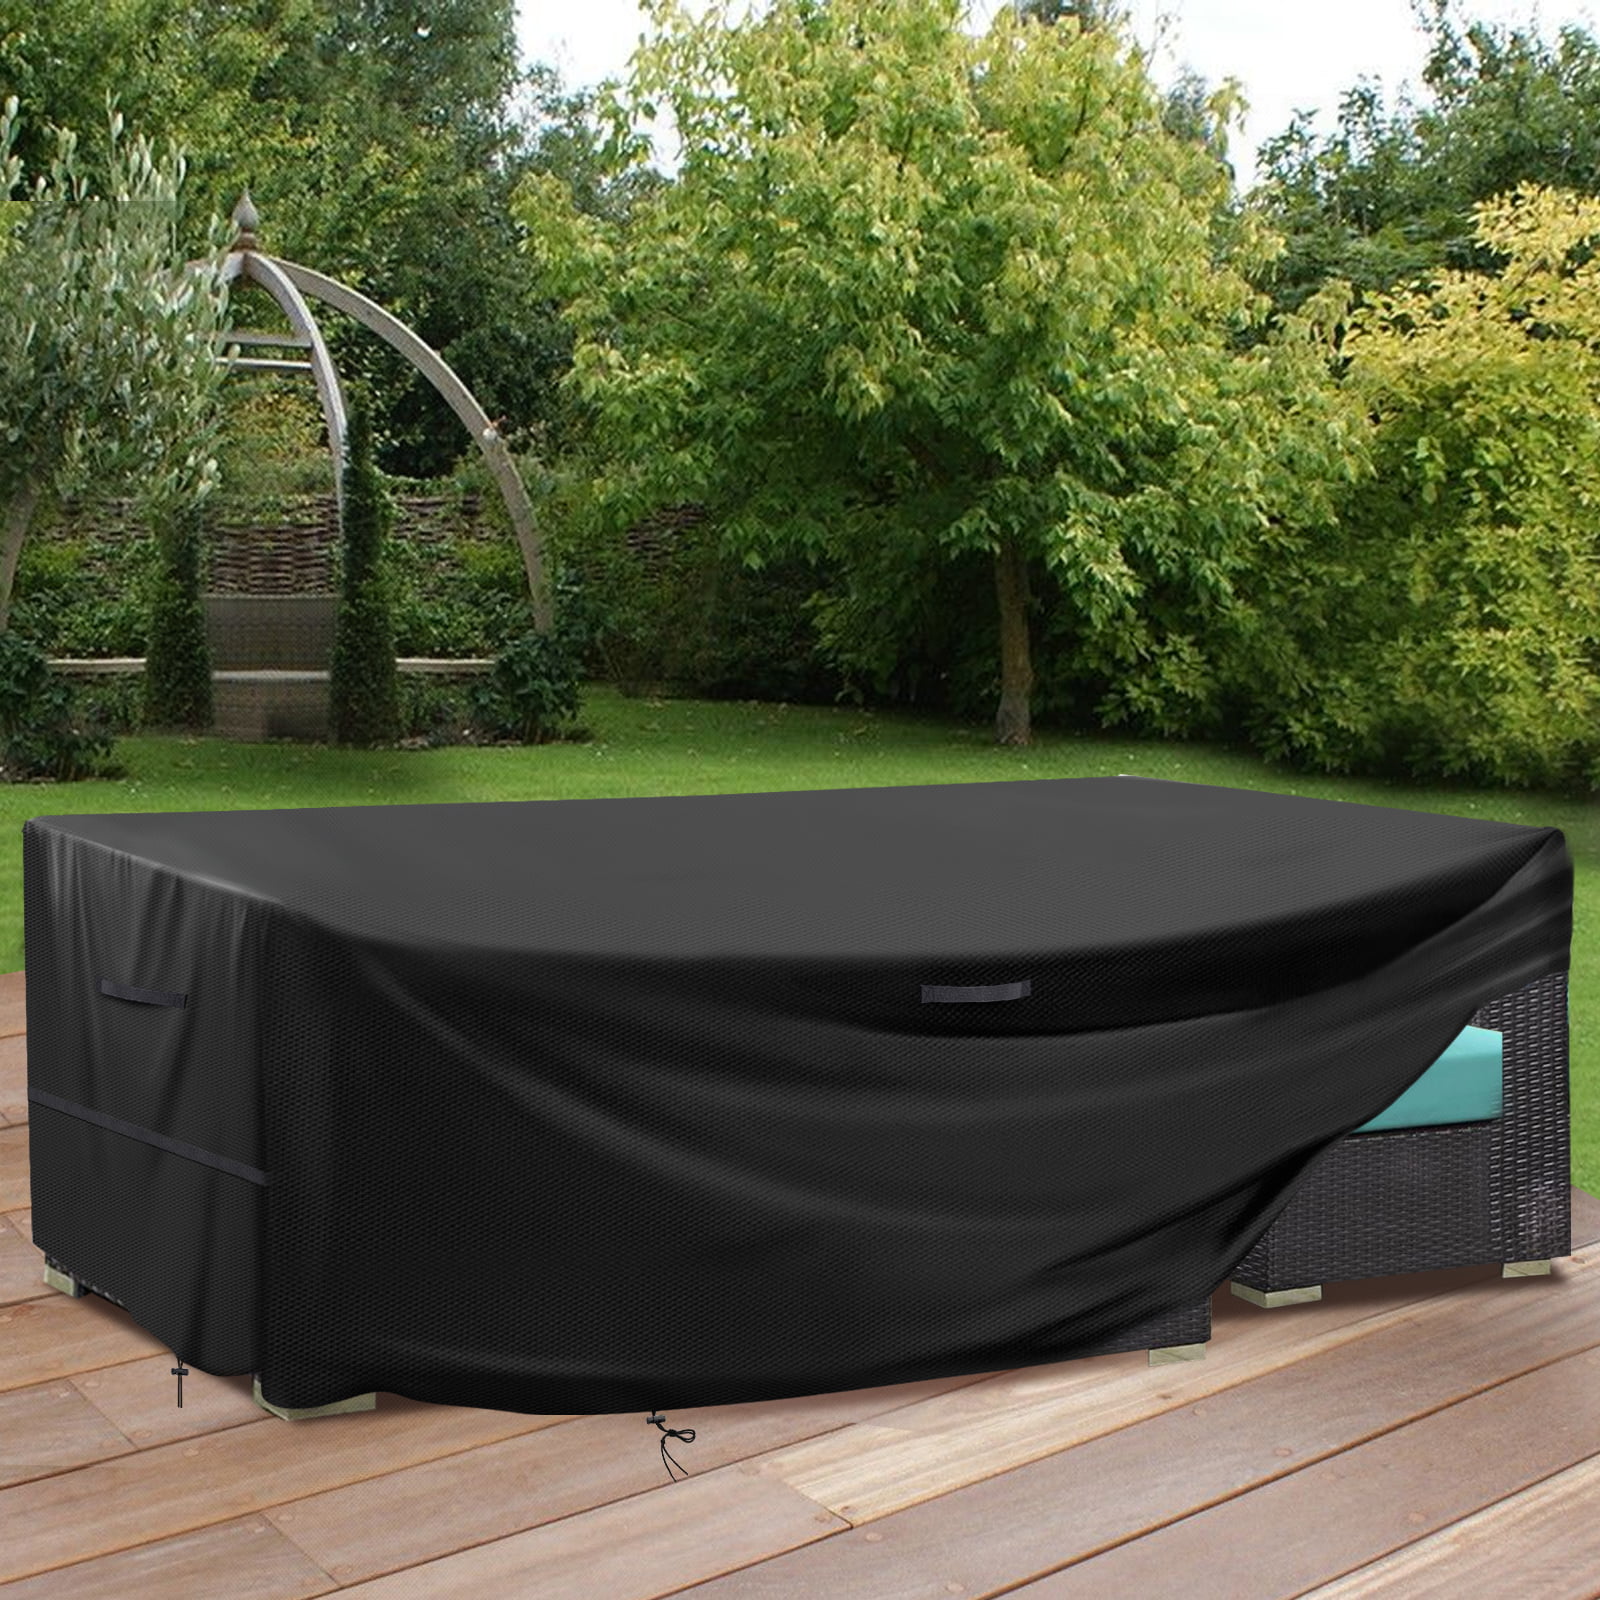 Waterproof Dustproof Patio Furniture Covers Rectangle Table Rain Cover Outdoor 